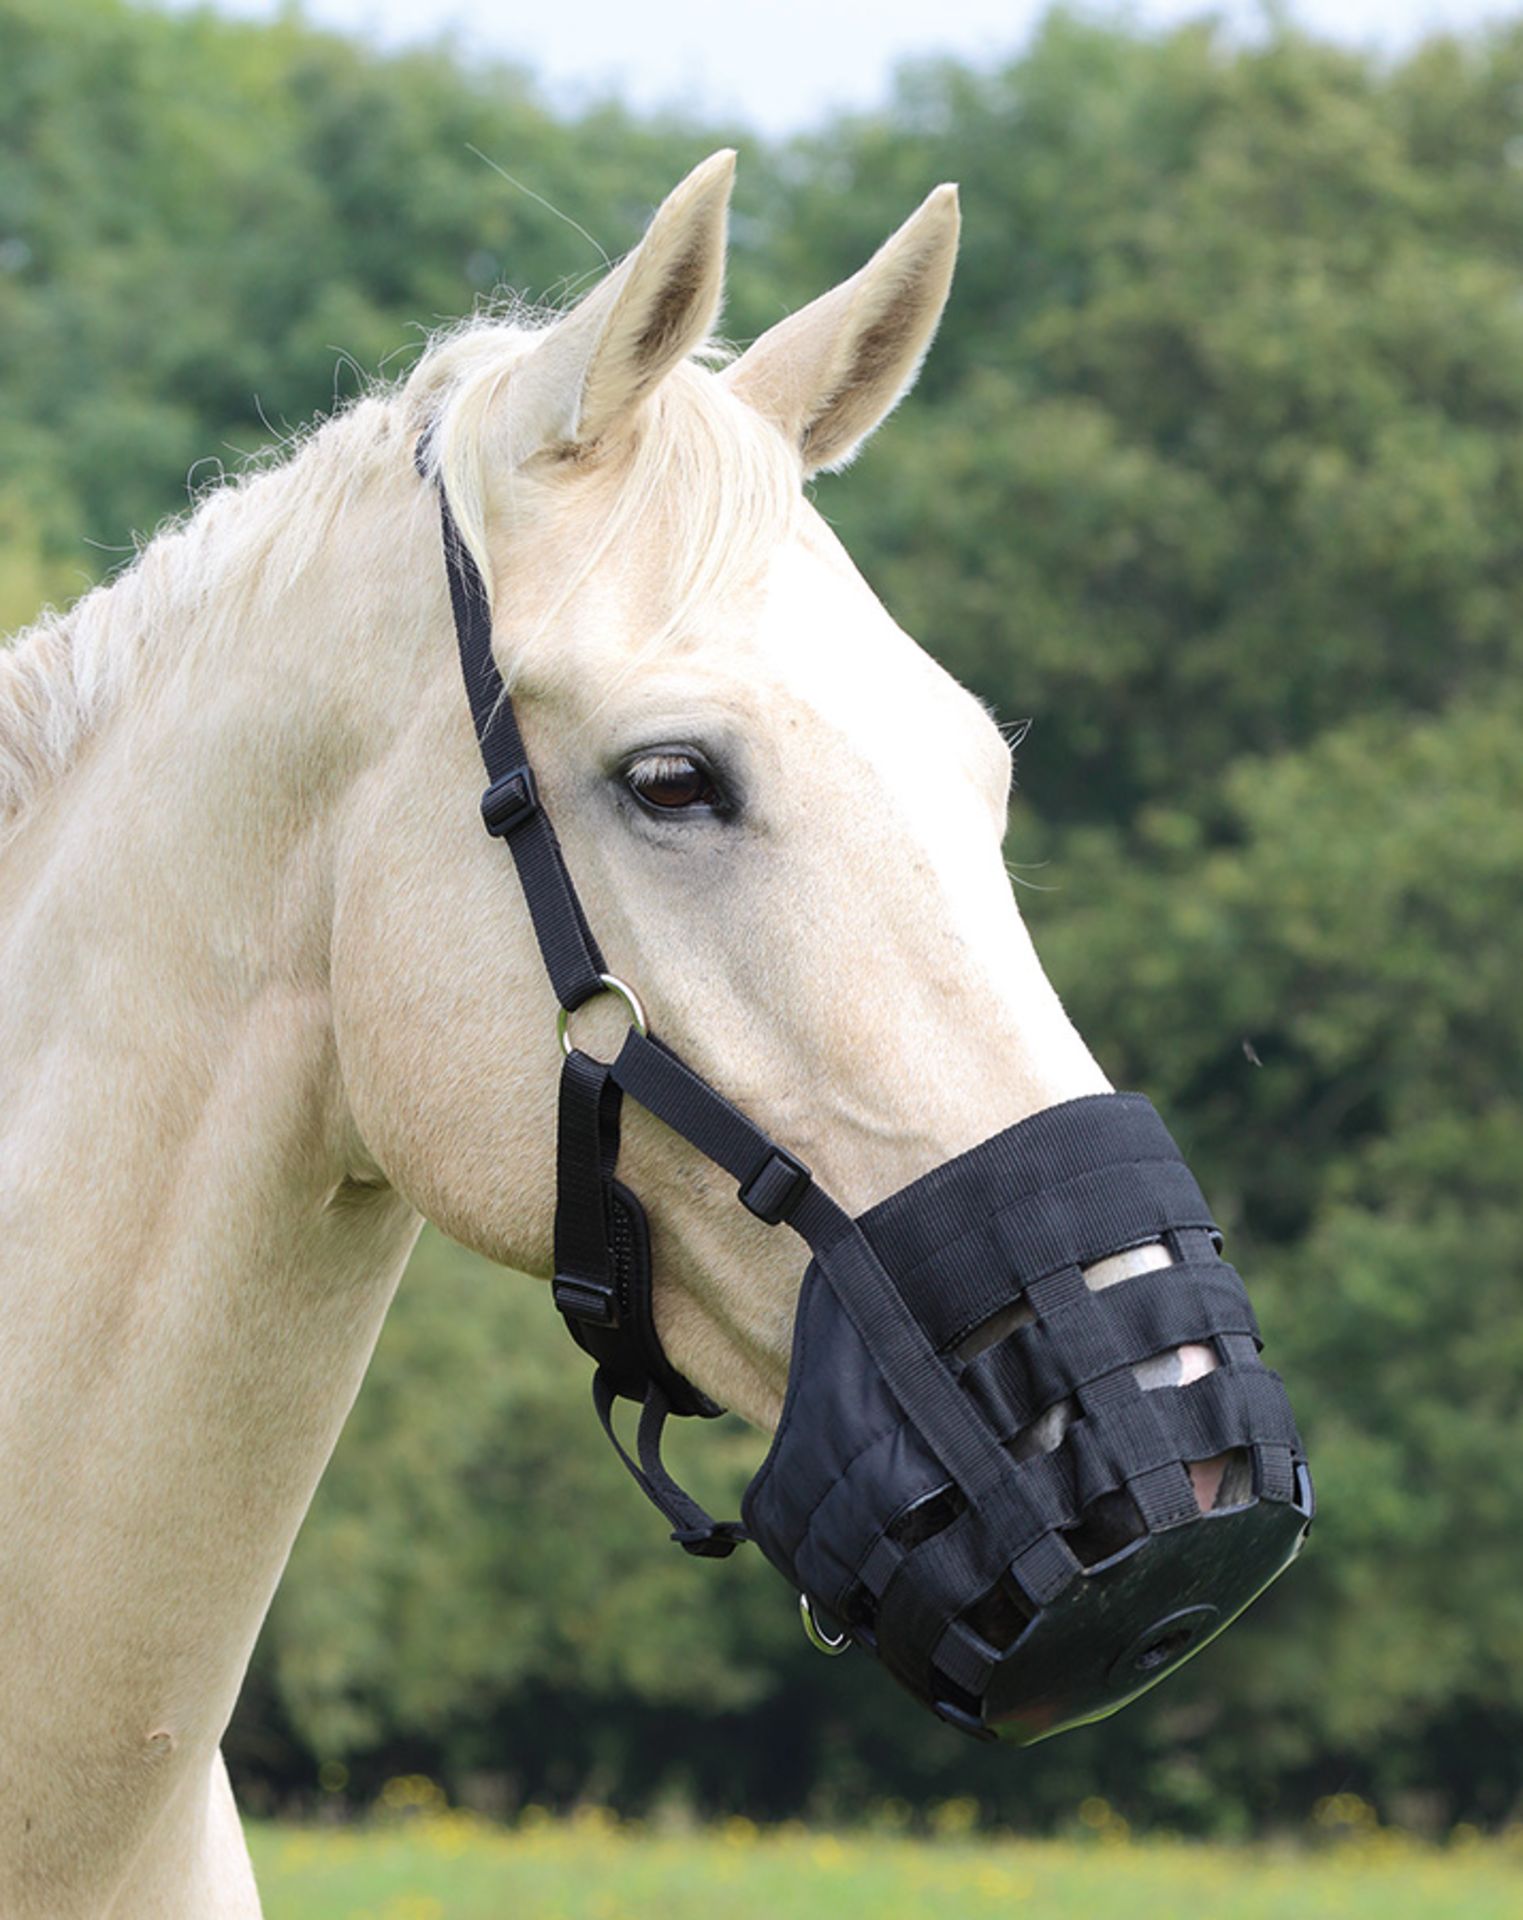 1 x Shires Comfort Grazing Muzzle - Small Pony 495N Black - New Stock - CL401 - Ref J891 - Location: